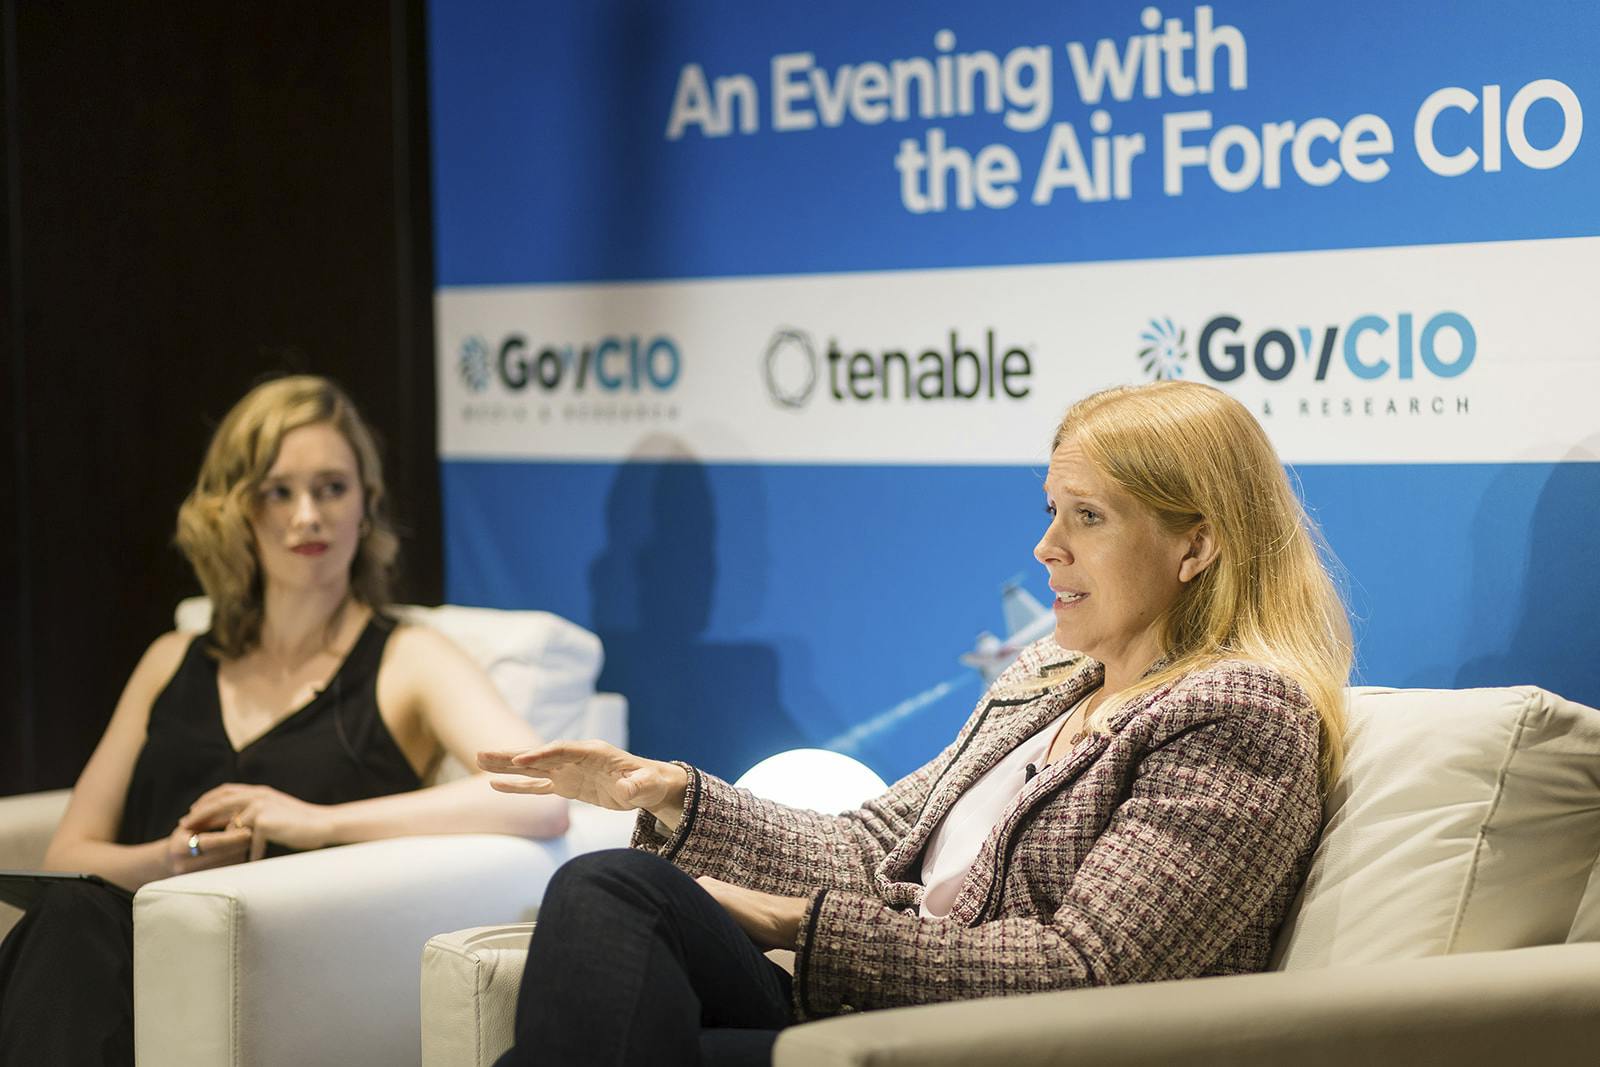 An Evening with the Air Force CIO